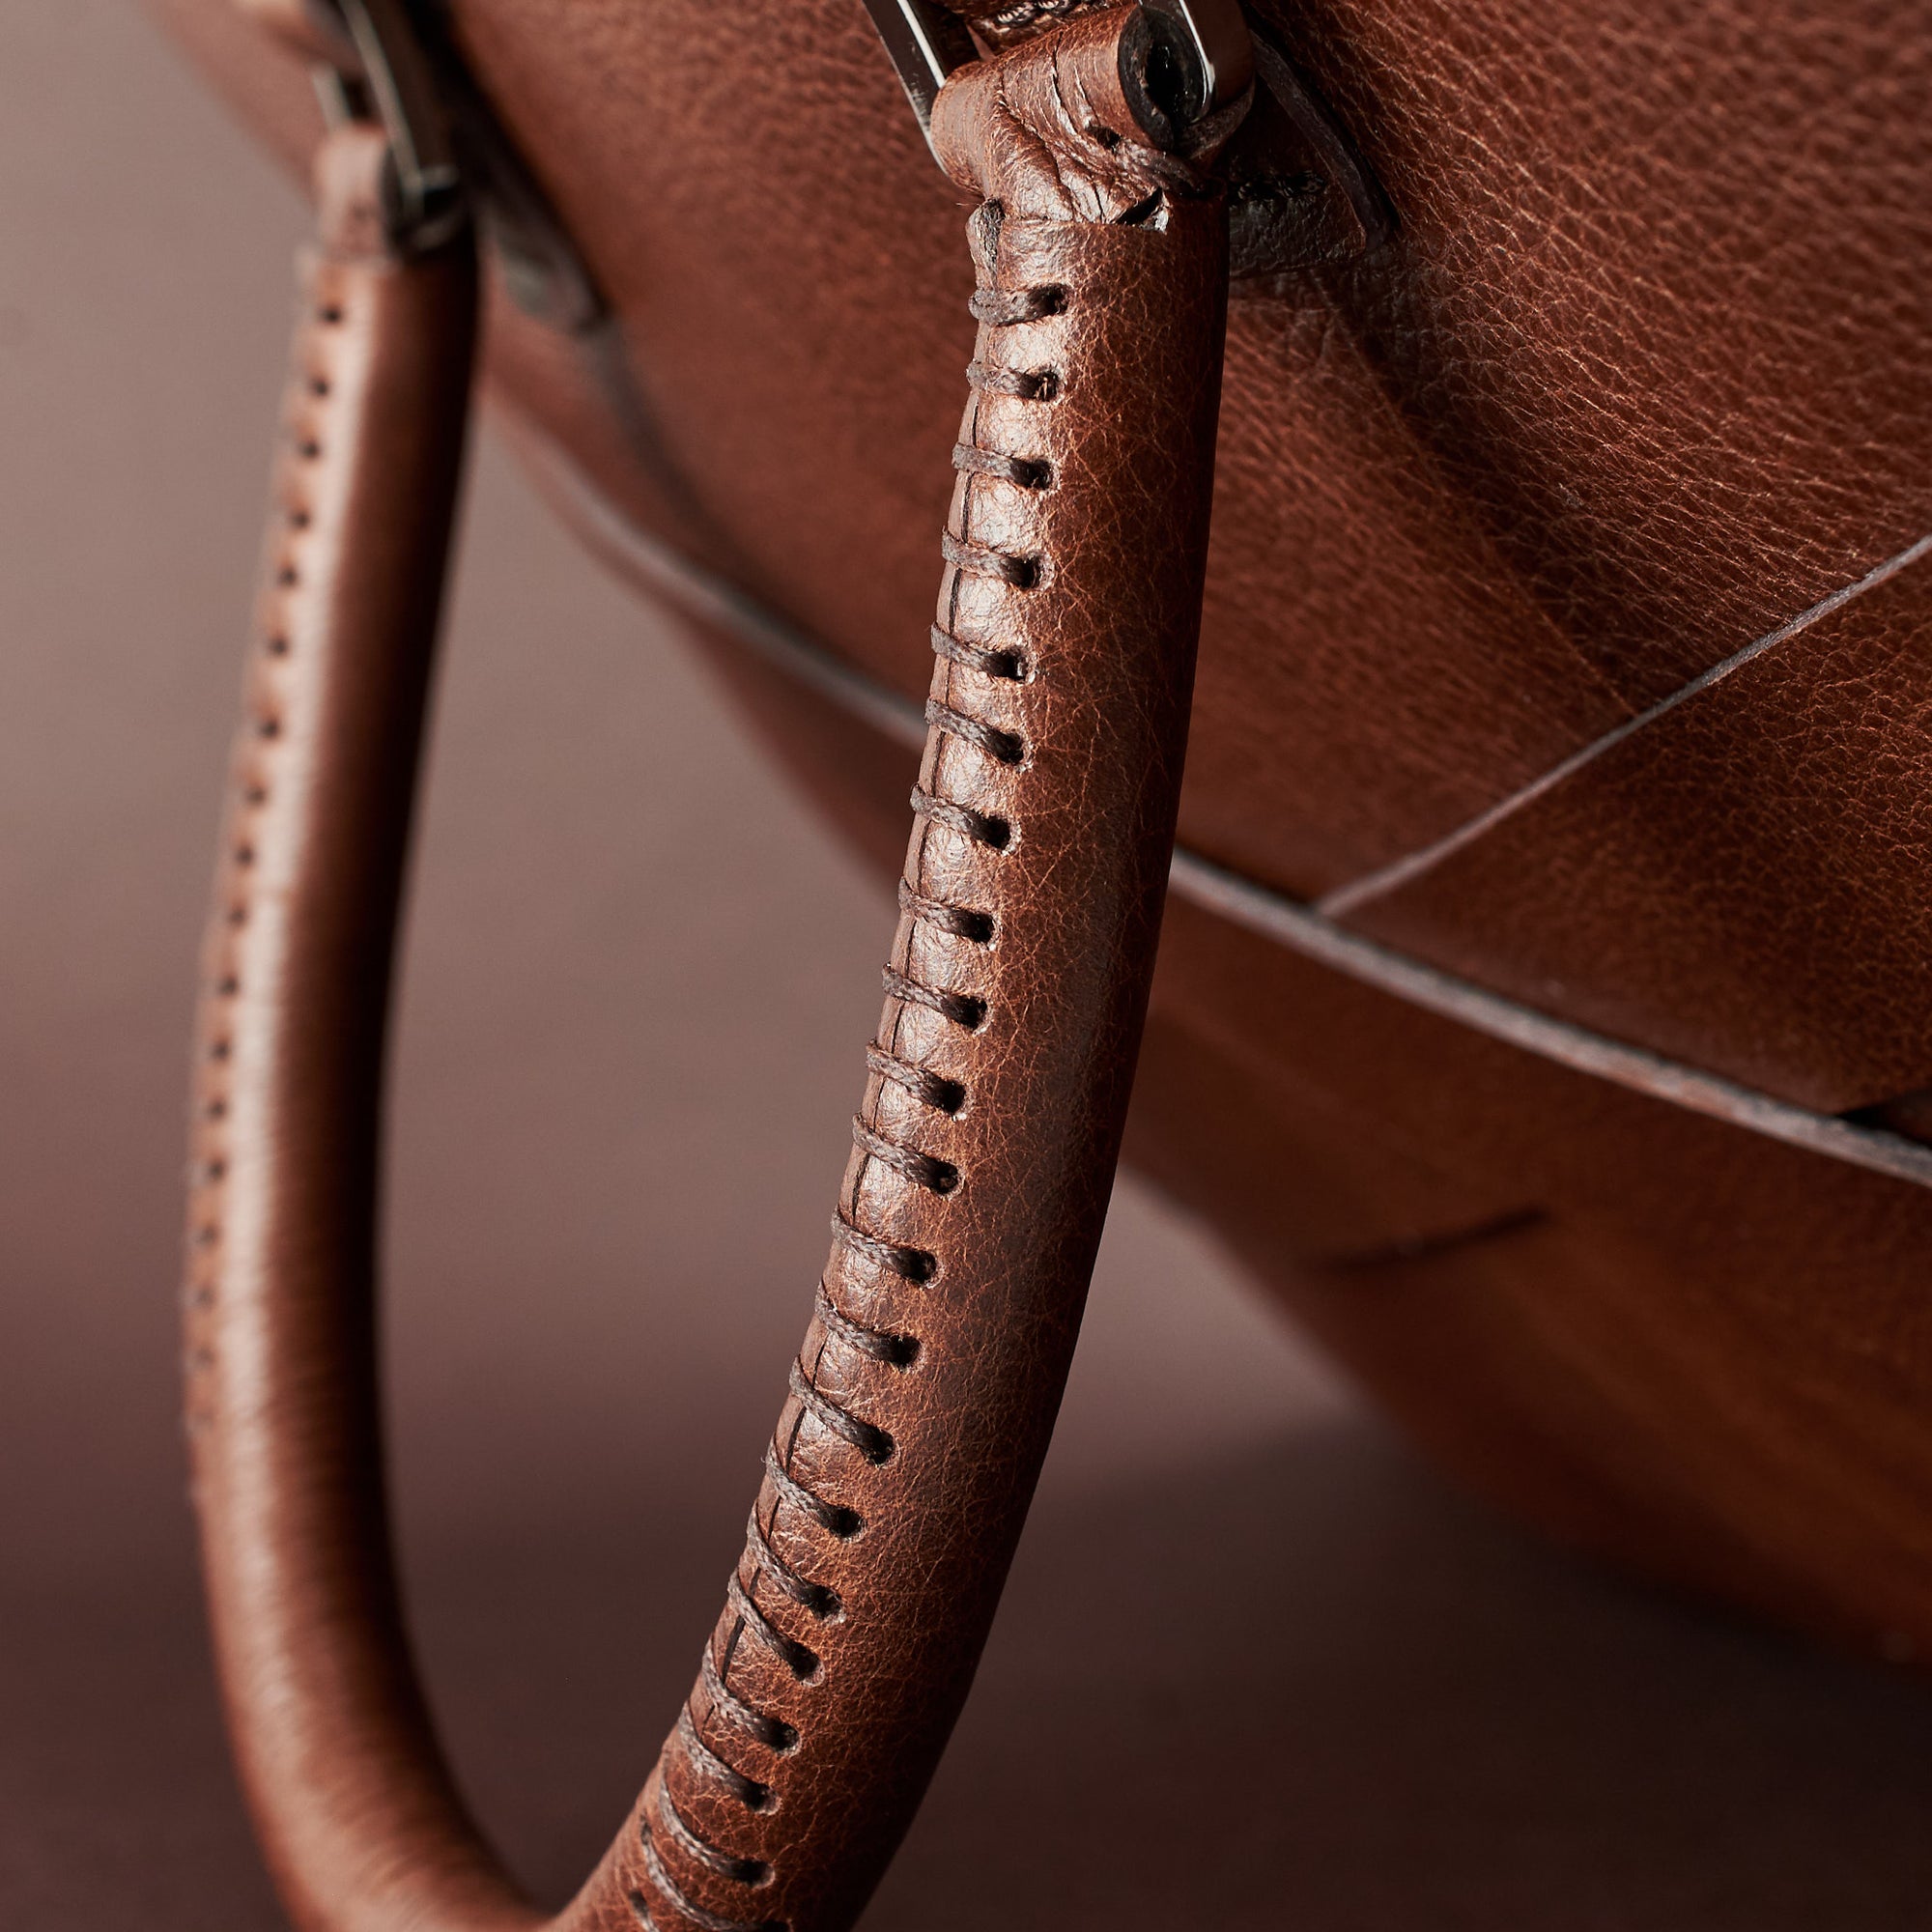 Hand stitch cylindrical handle detail. Brown leather briefcase laptop bag for men. Gazeli laptop briefcase by Capra Leather.